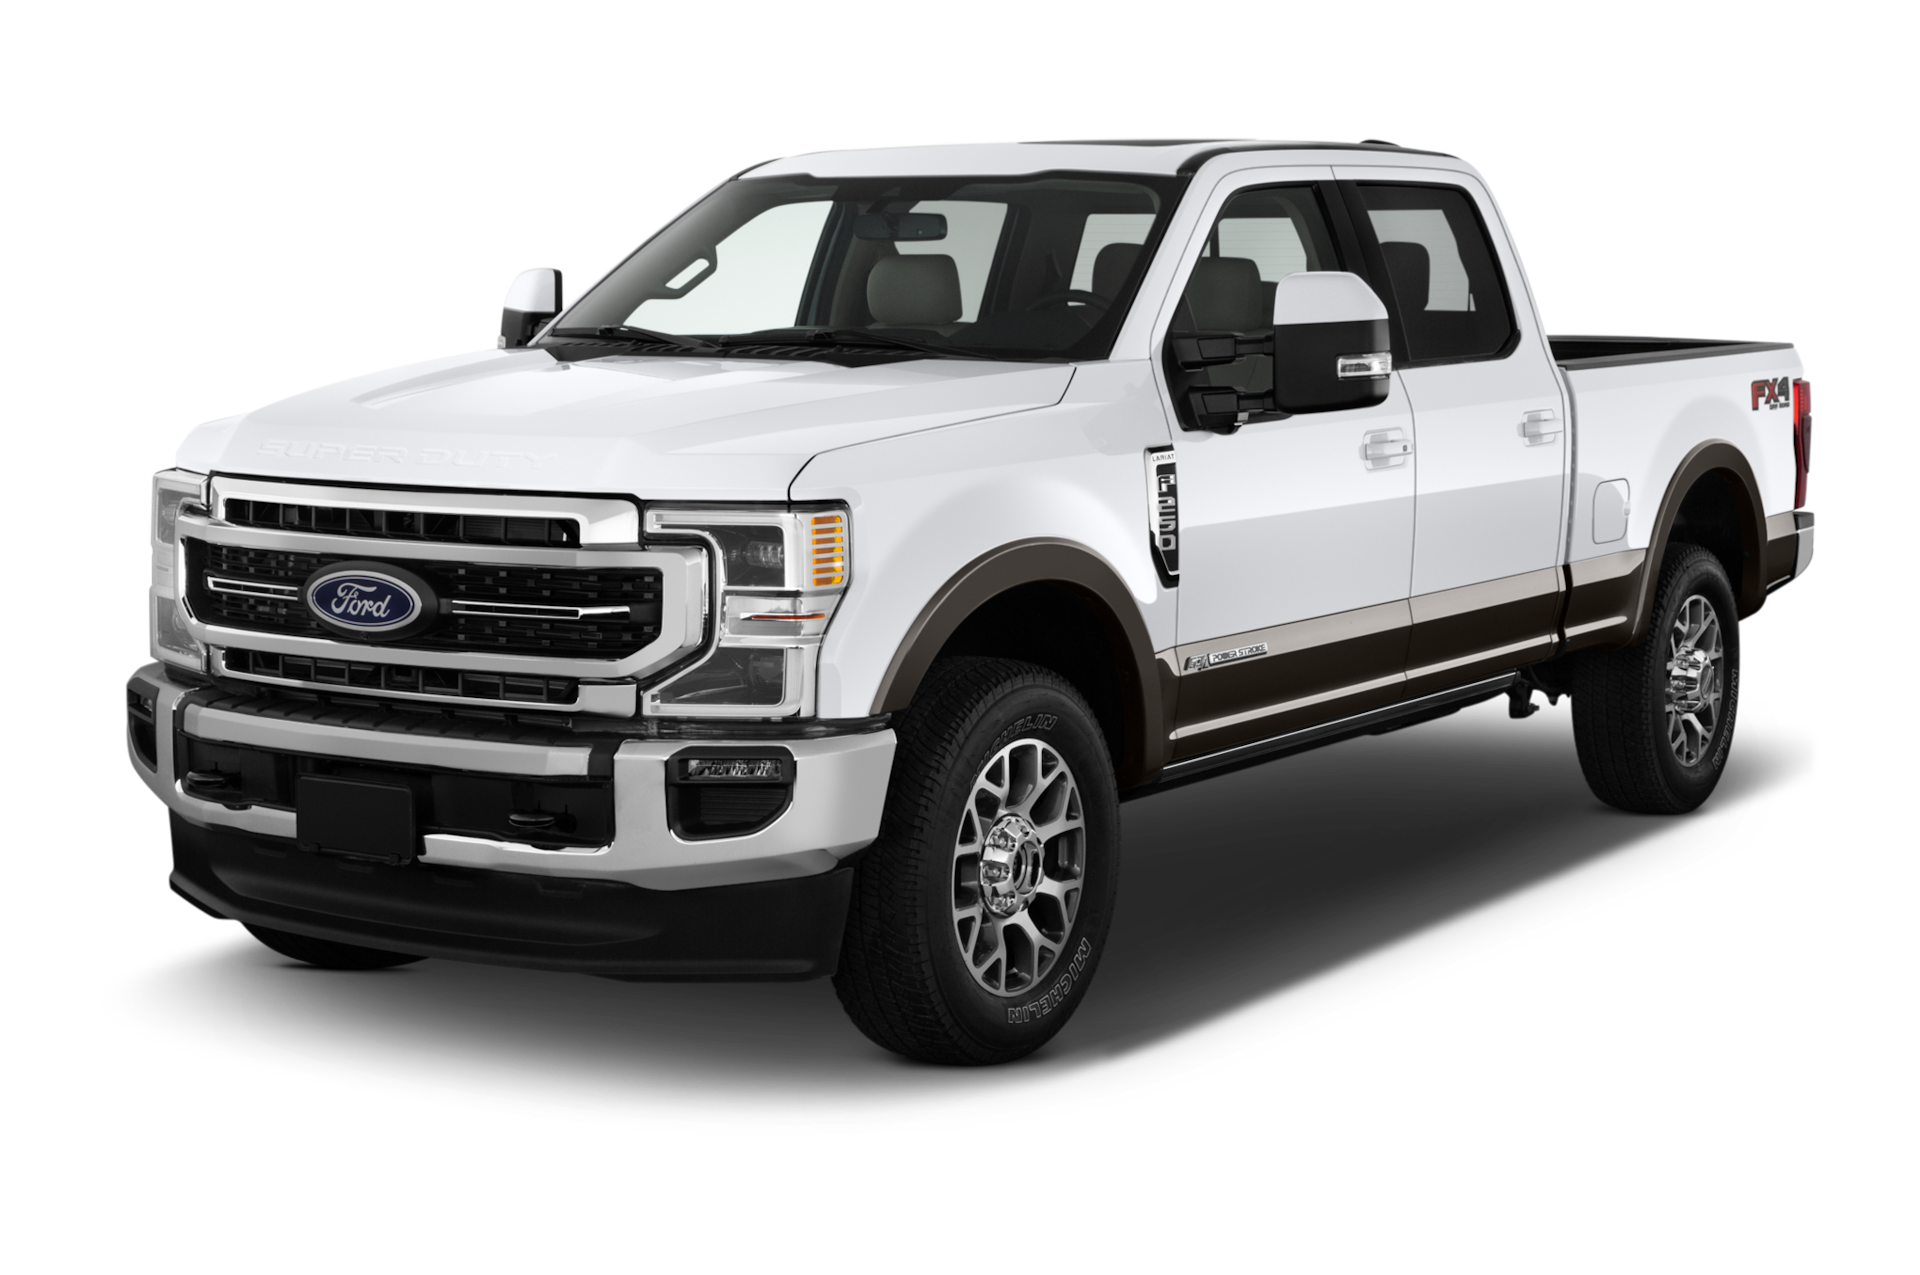 2021 Ford F-250 Prices, Reviews, and Photos - MotorTrend